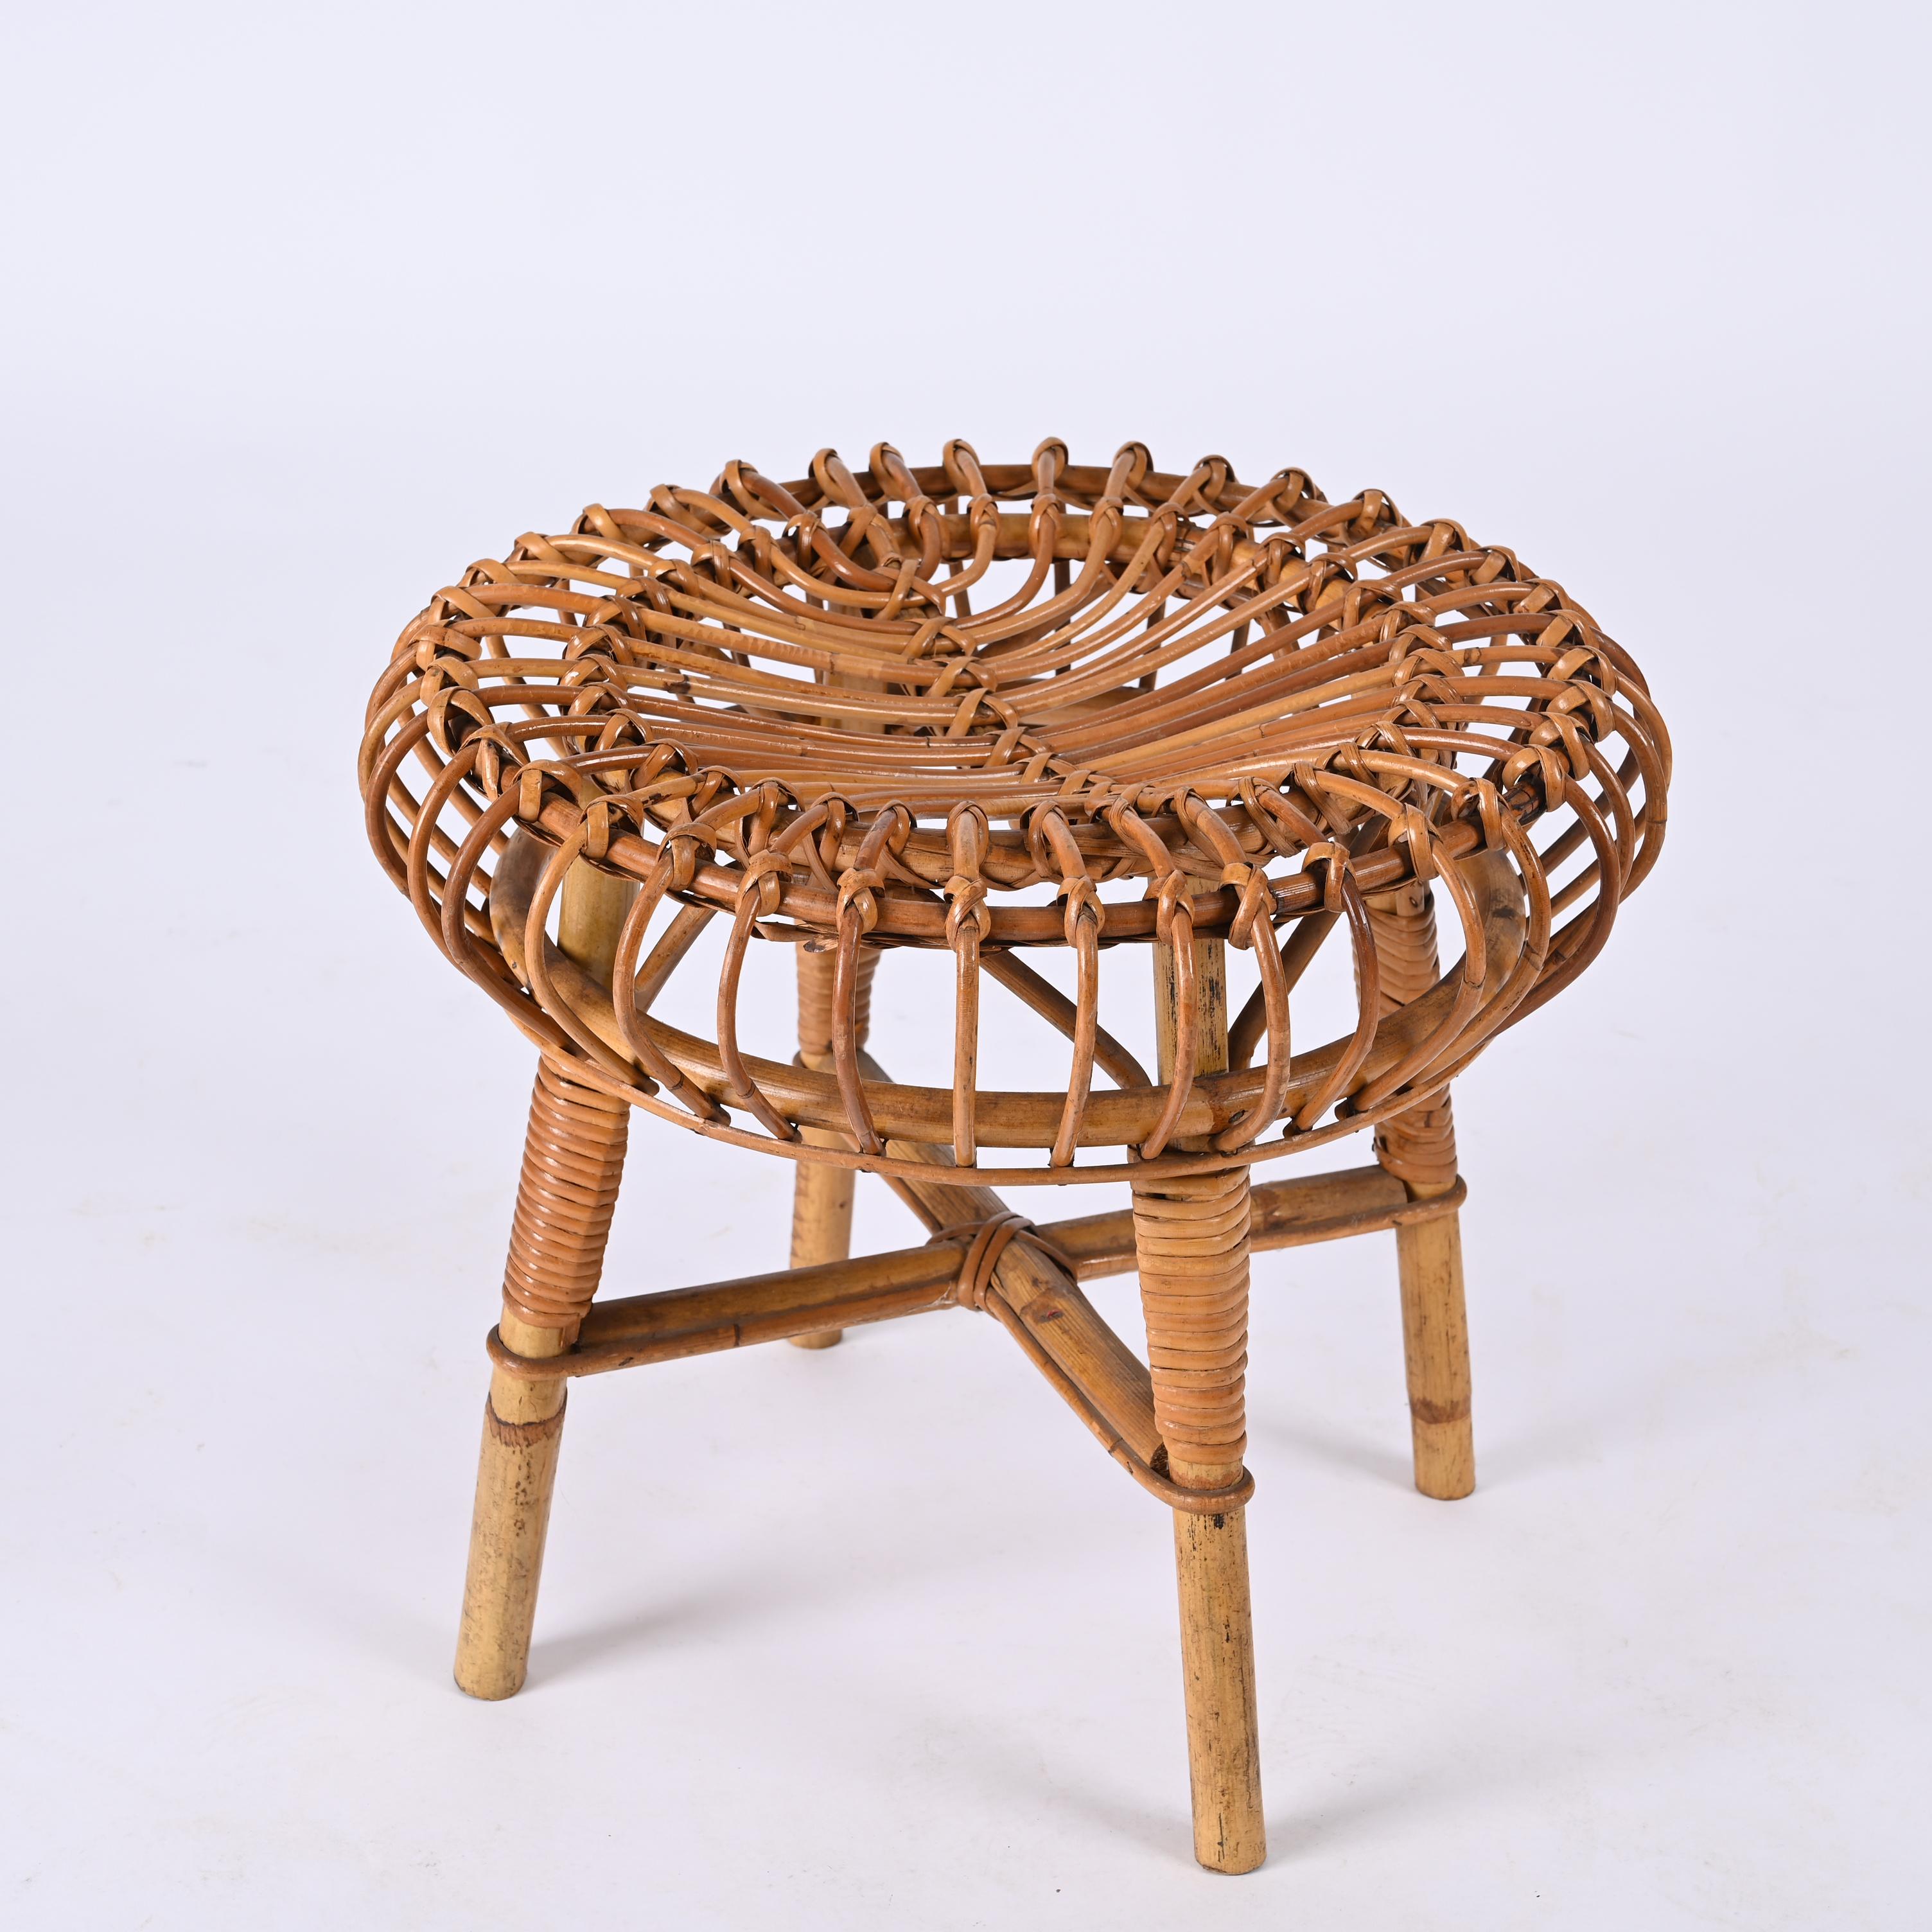 Midcentury round bamboo & wicker ottoman stool. Franco Albini designed this piece in Italy during the 1960s.

This item is iconic as Franco Albini's extraordinary architectural ideas emerge in their purity and poetry, mixing shapes with fantastic